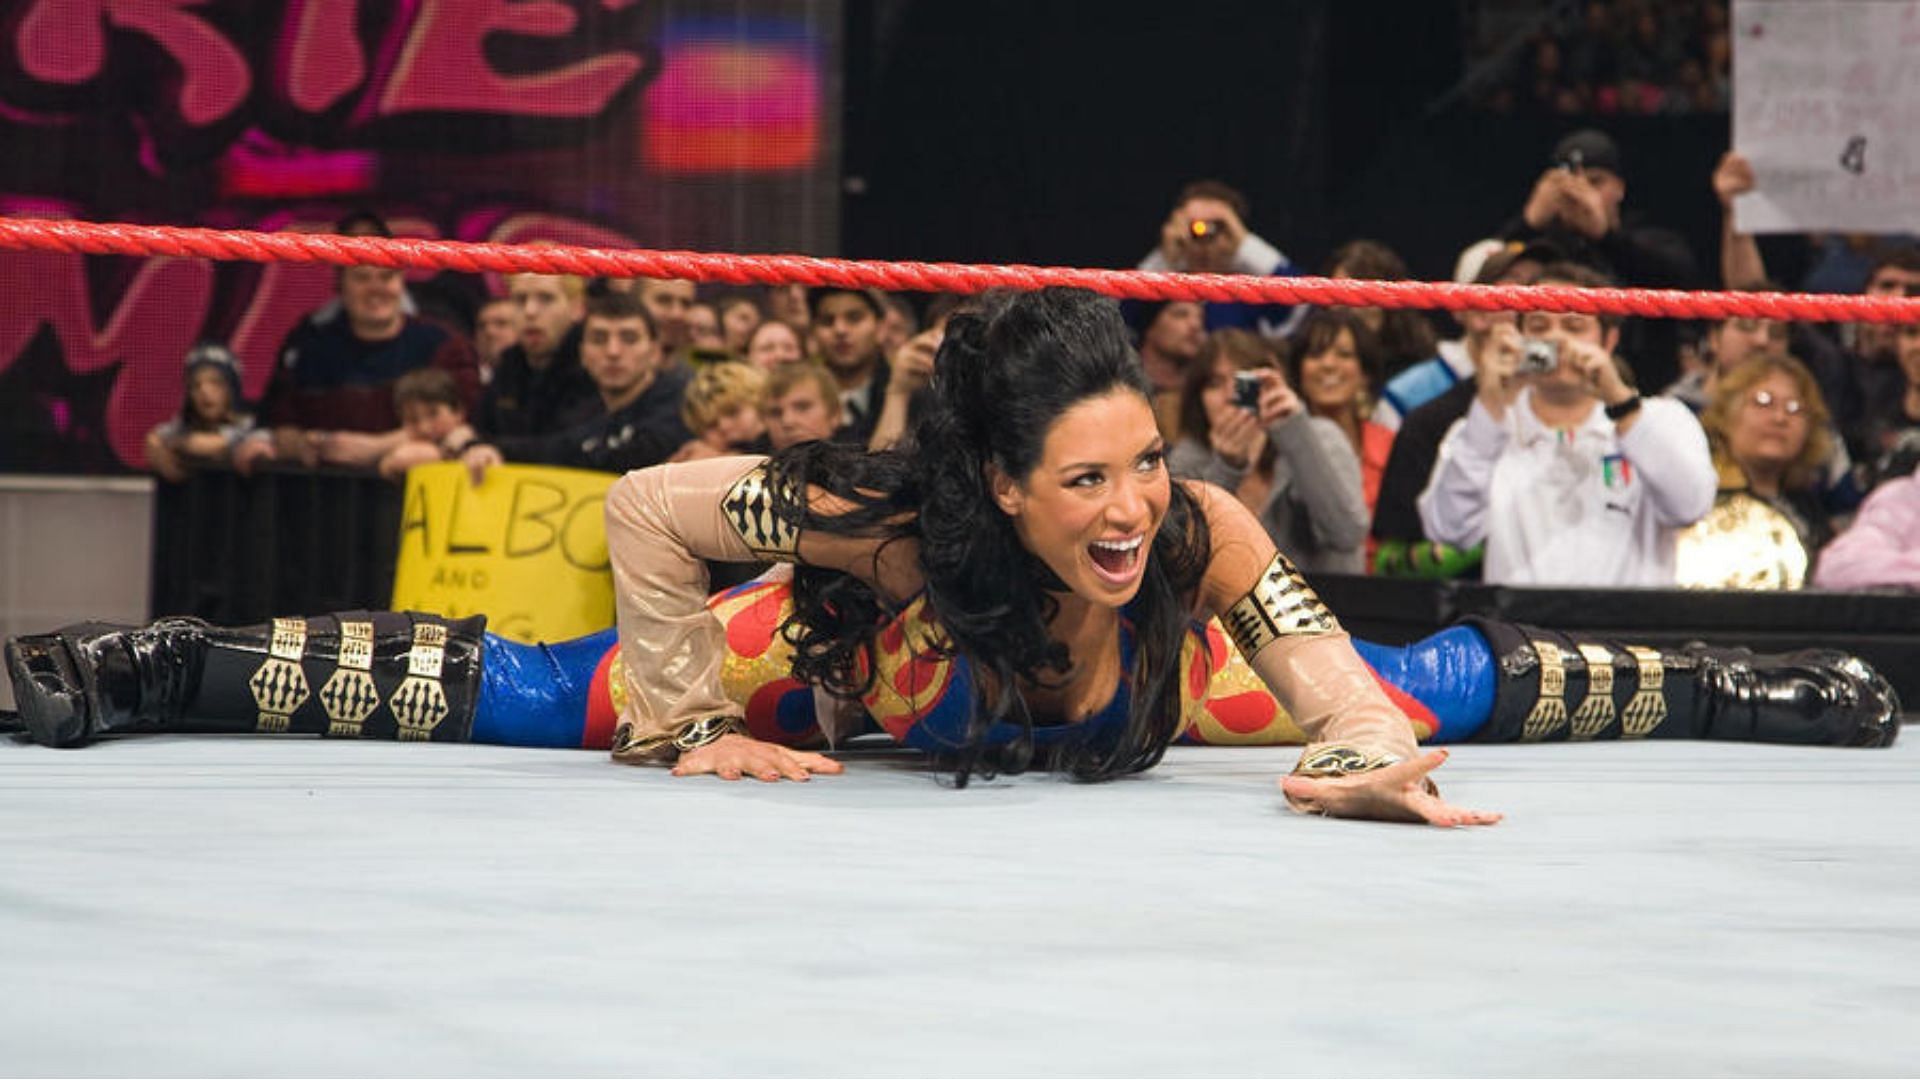 Melina is a former 5-time Women